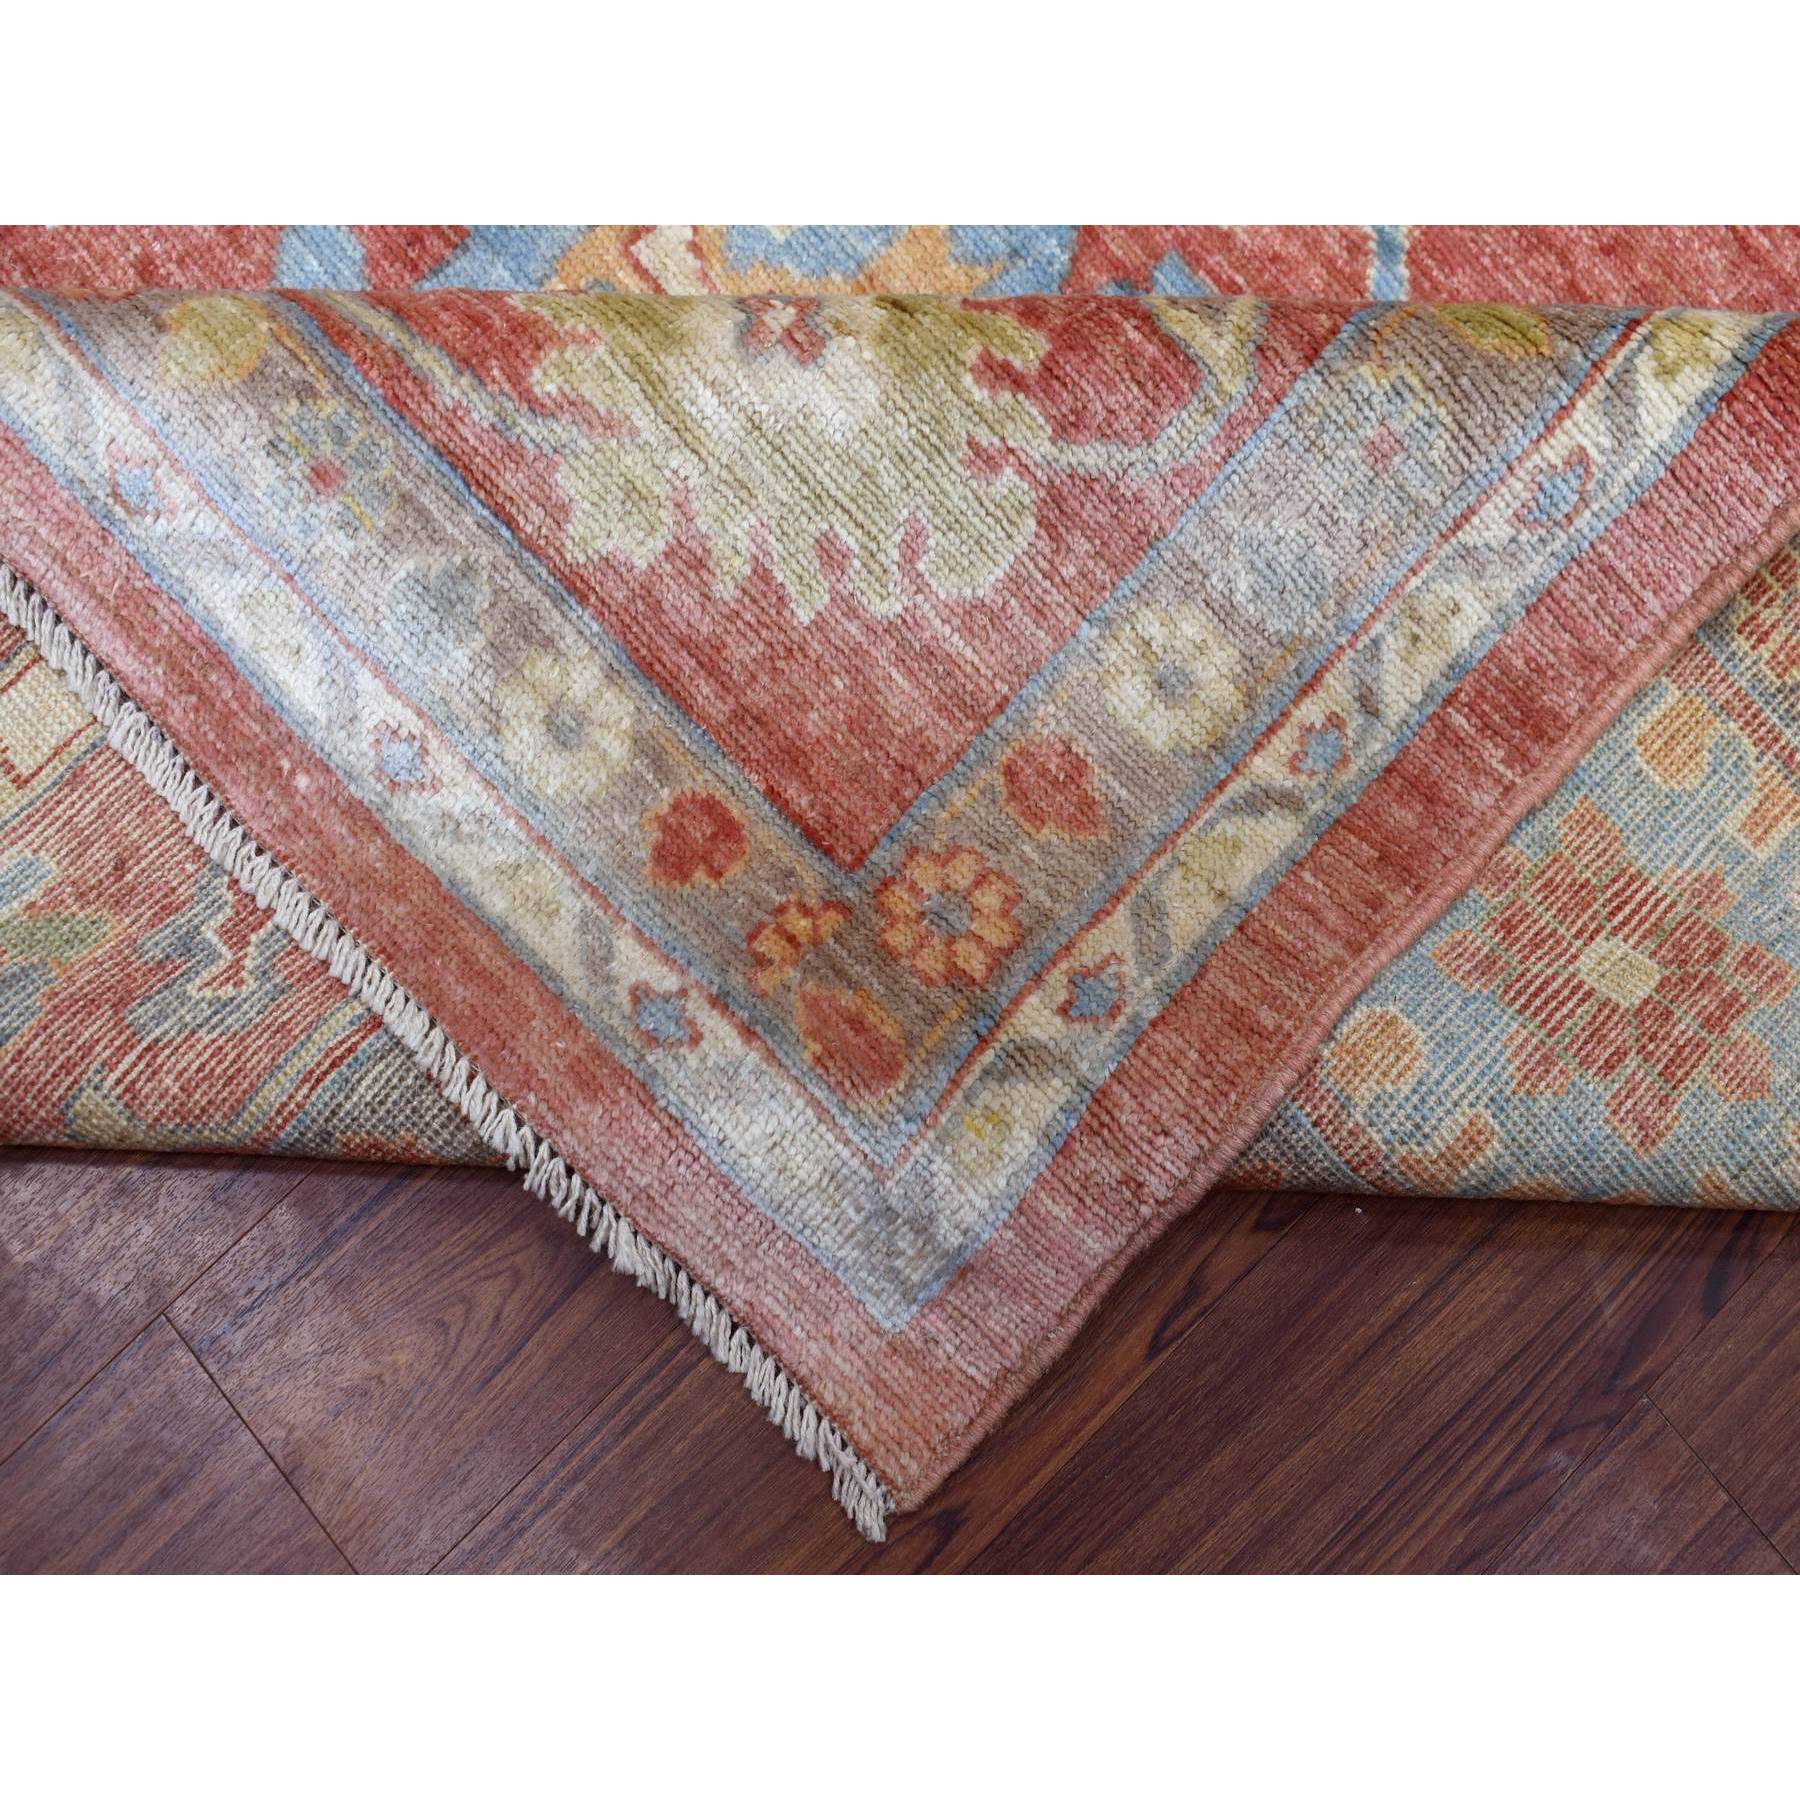 11'10"x14'3" Coral Red with Touches of Blue and Green Afghan Angora Oushak, All Over Leaf Design, Soft Wool Hand Woven Oriental Oversized Rug 